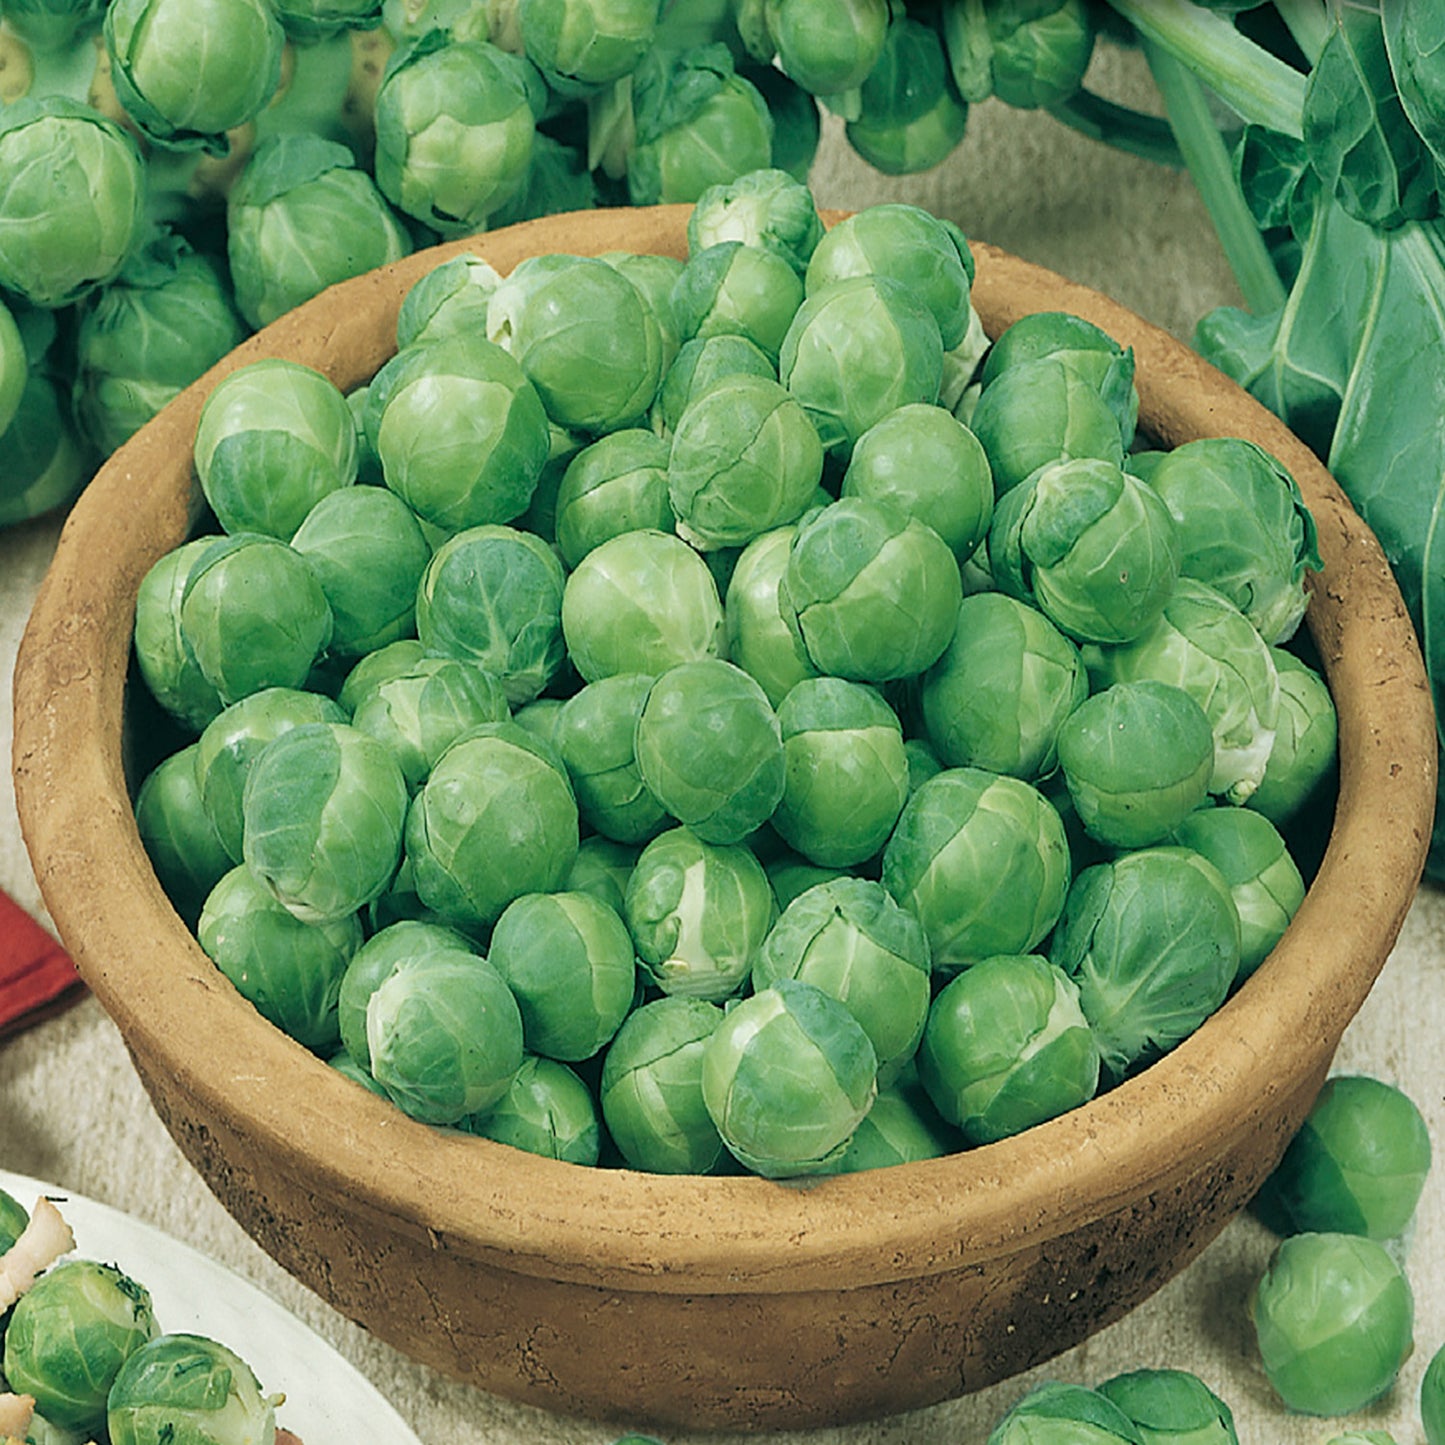 Brussels Sprouts Seeds, Catskill